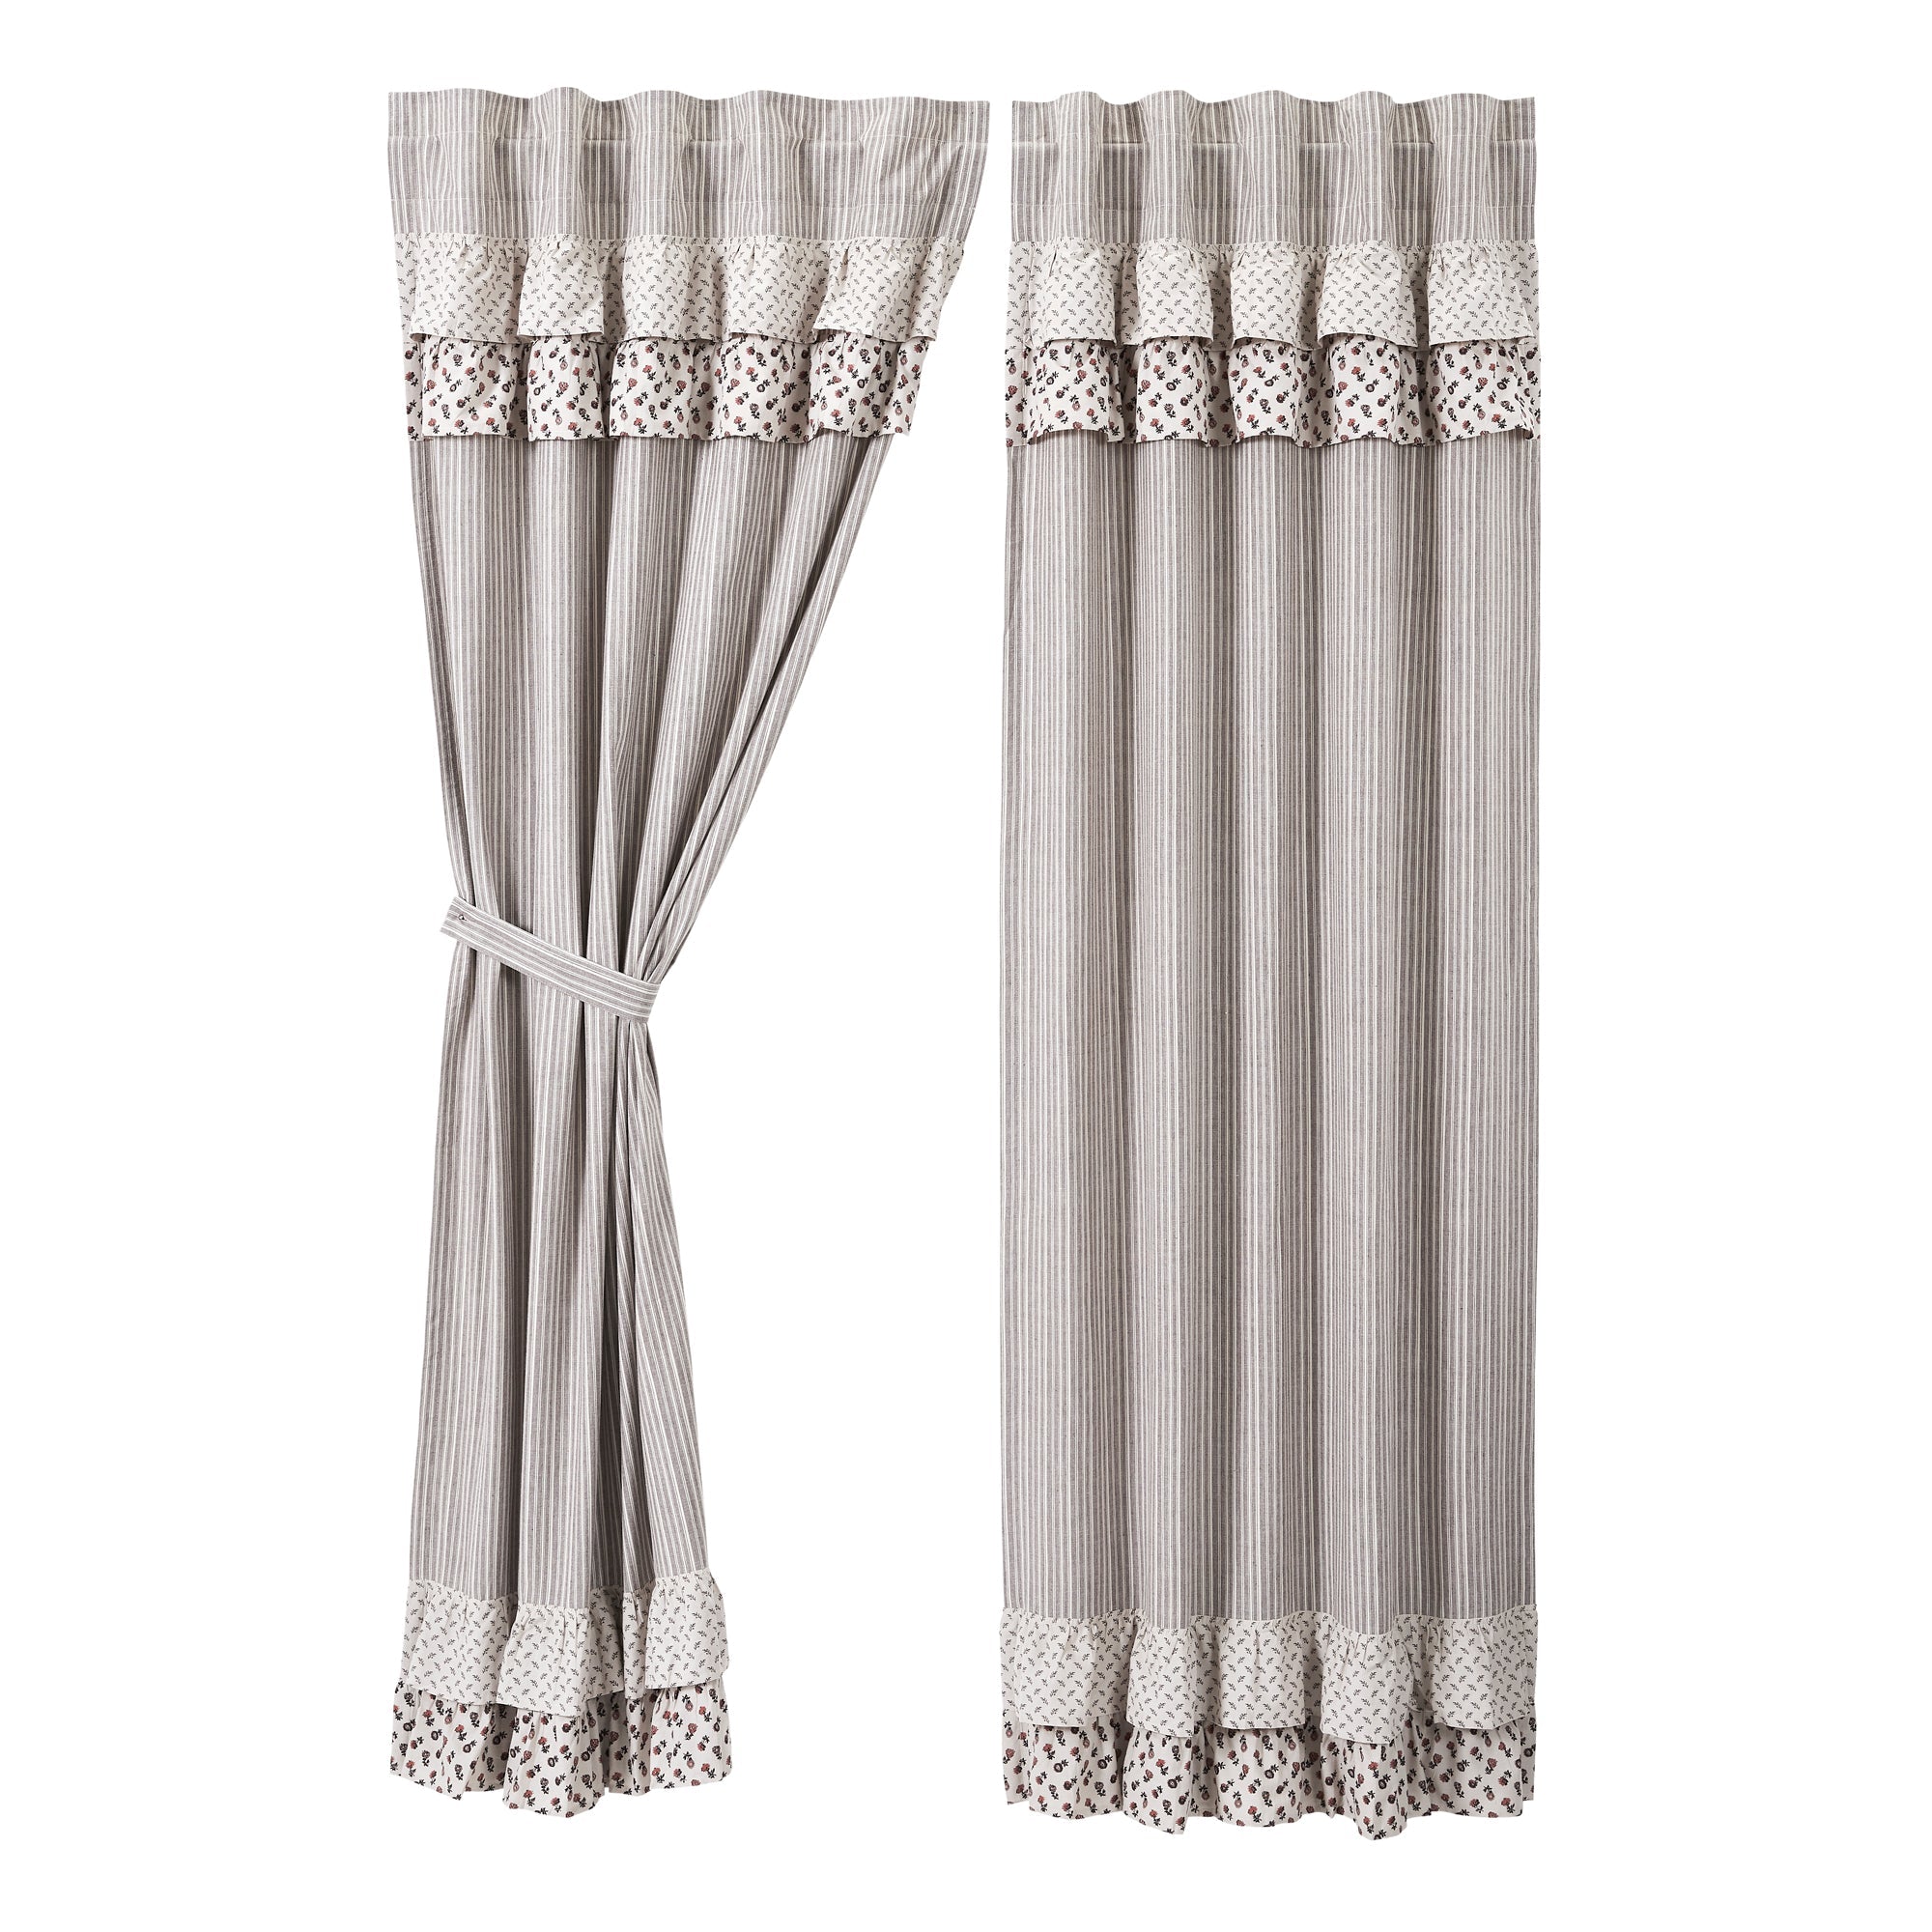 Florette Ruffled Panel Curtain Set of 2 84x40 VHC Brands